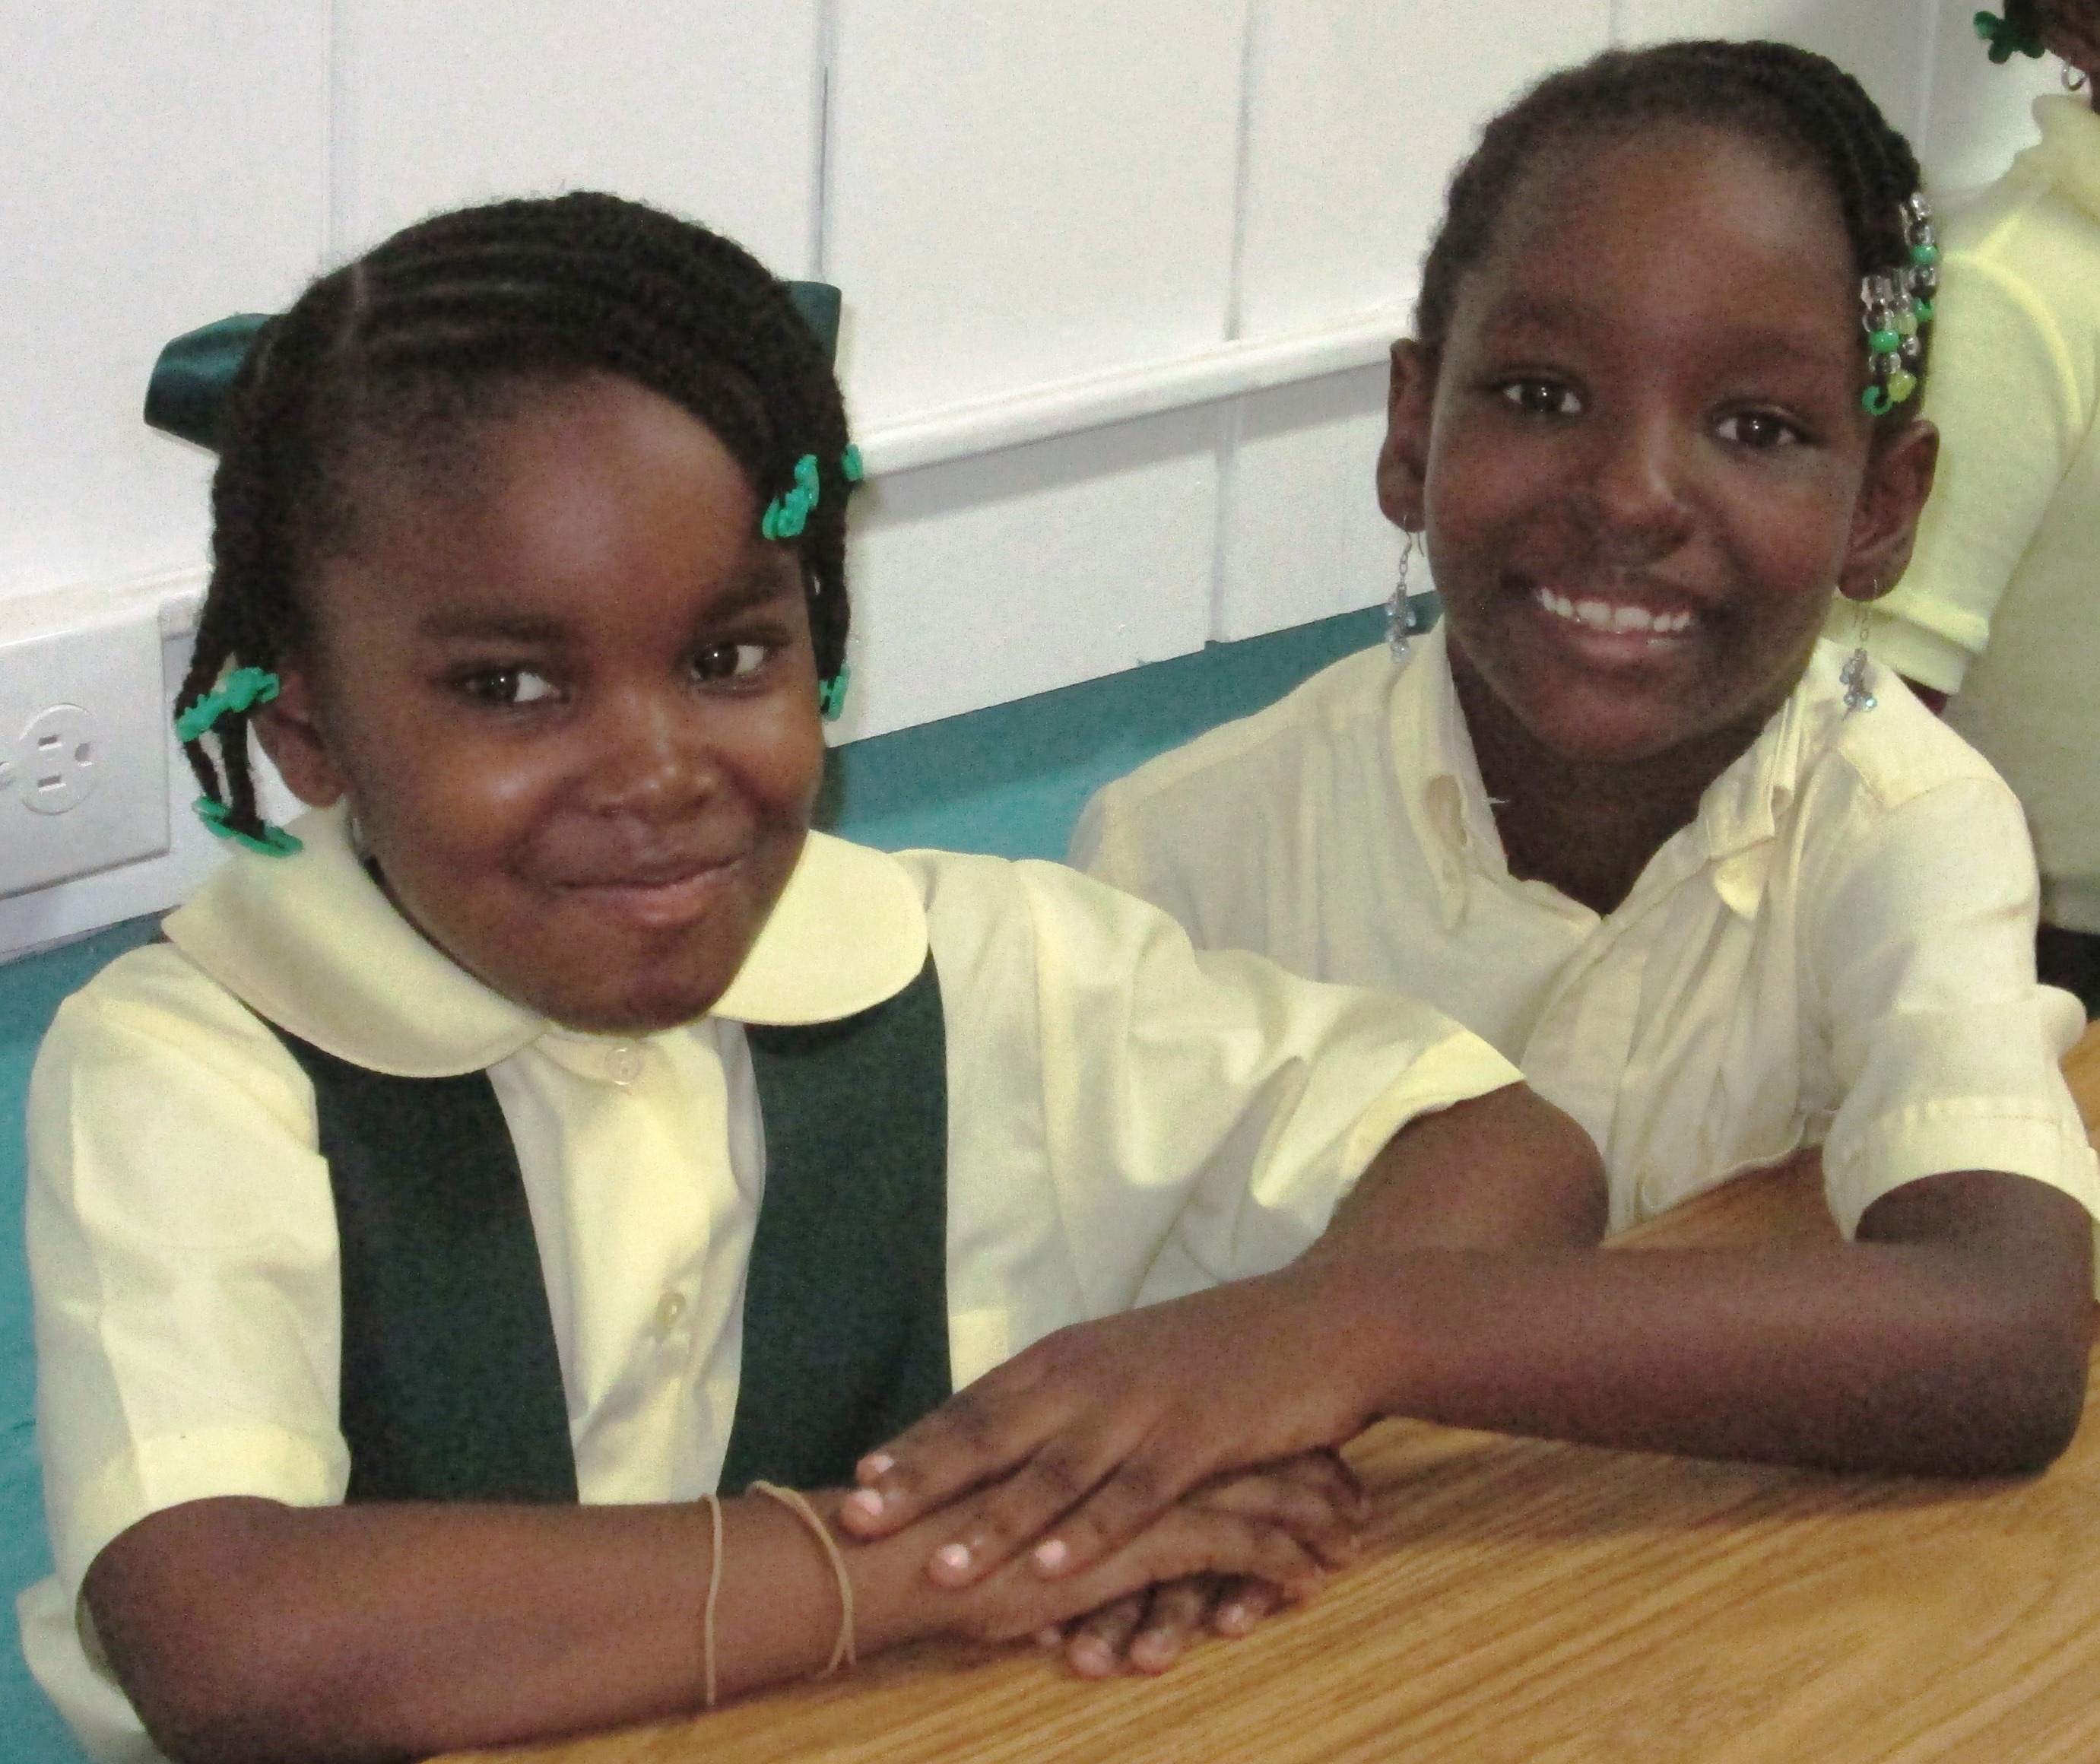 Jada JnPhillips, 6, and Jade Rawlins, 7, are all smiles on their first day as second-graders at Guy Benjamin School.